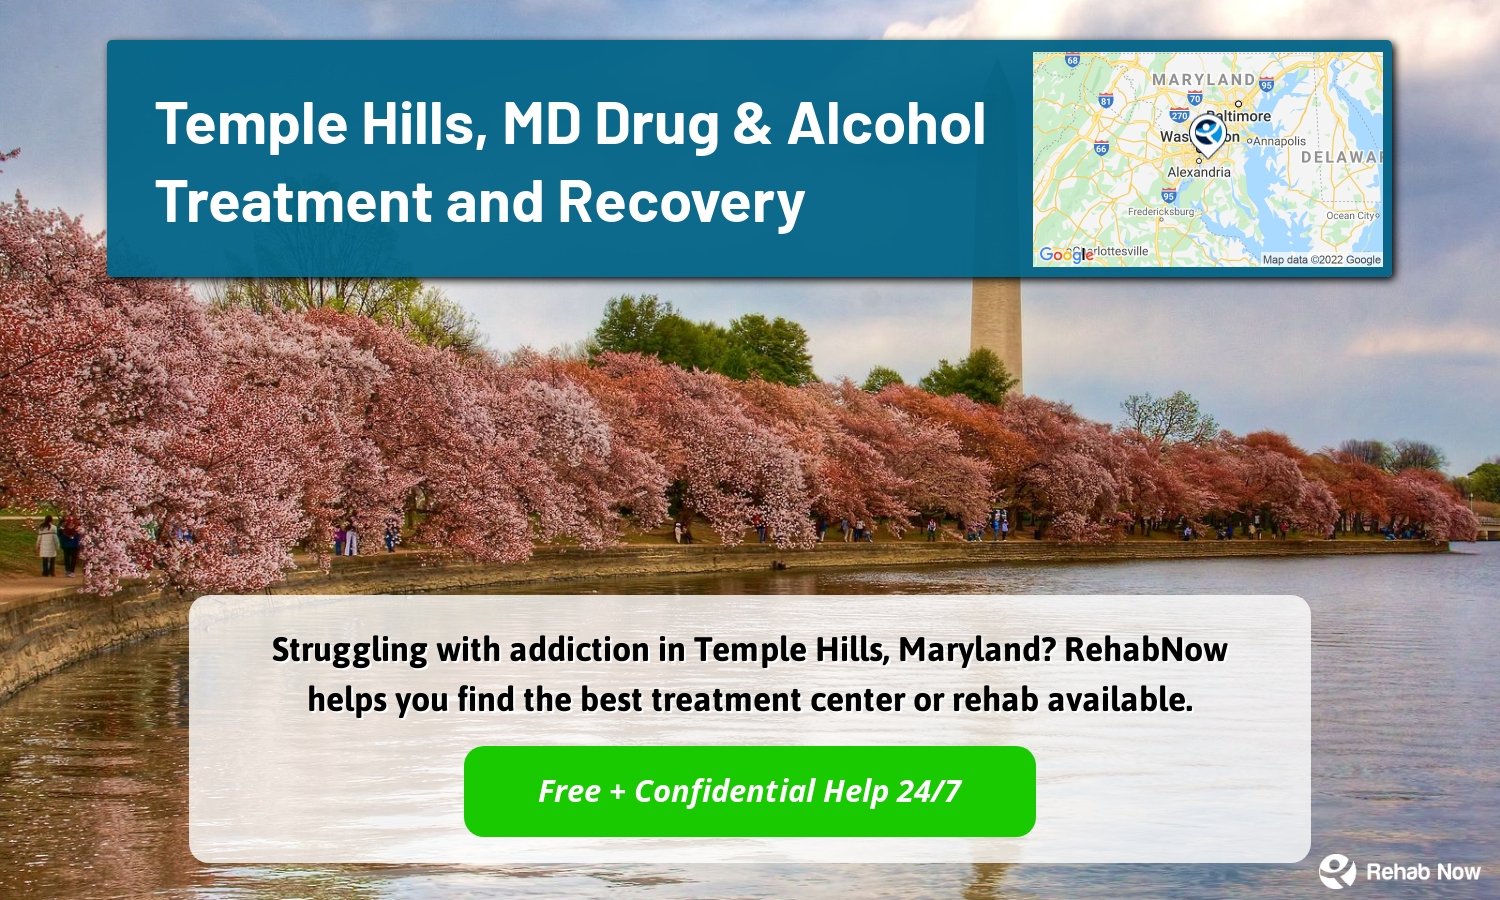 Struggling with addiction in Temple Hills, Maryland? RehabNow helps you find the best treatment center or rehab available.